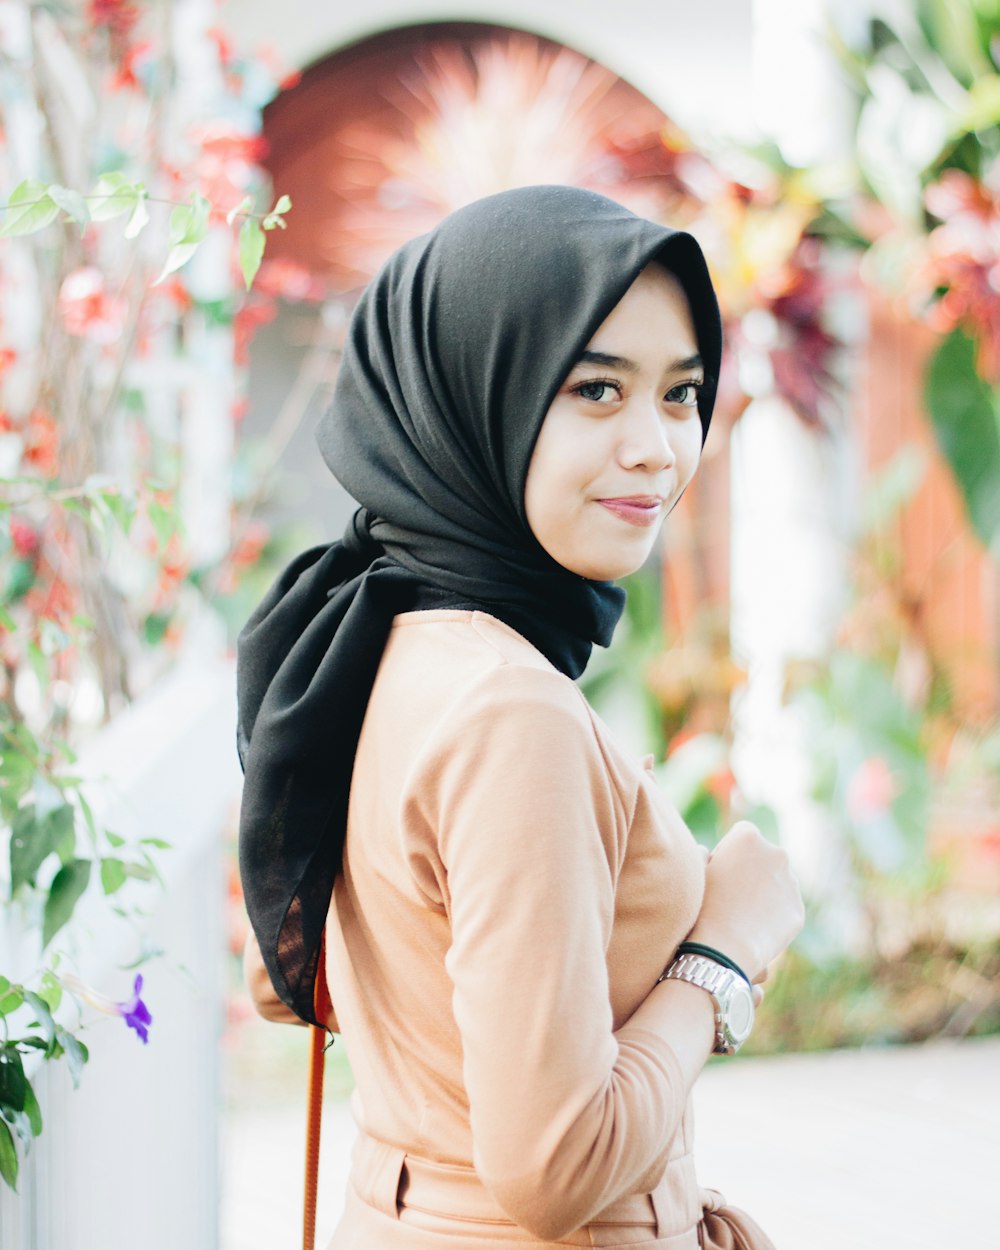 Download Hijab Woman Pictures Download Free Images On Unsplash